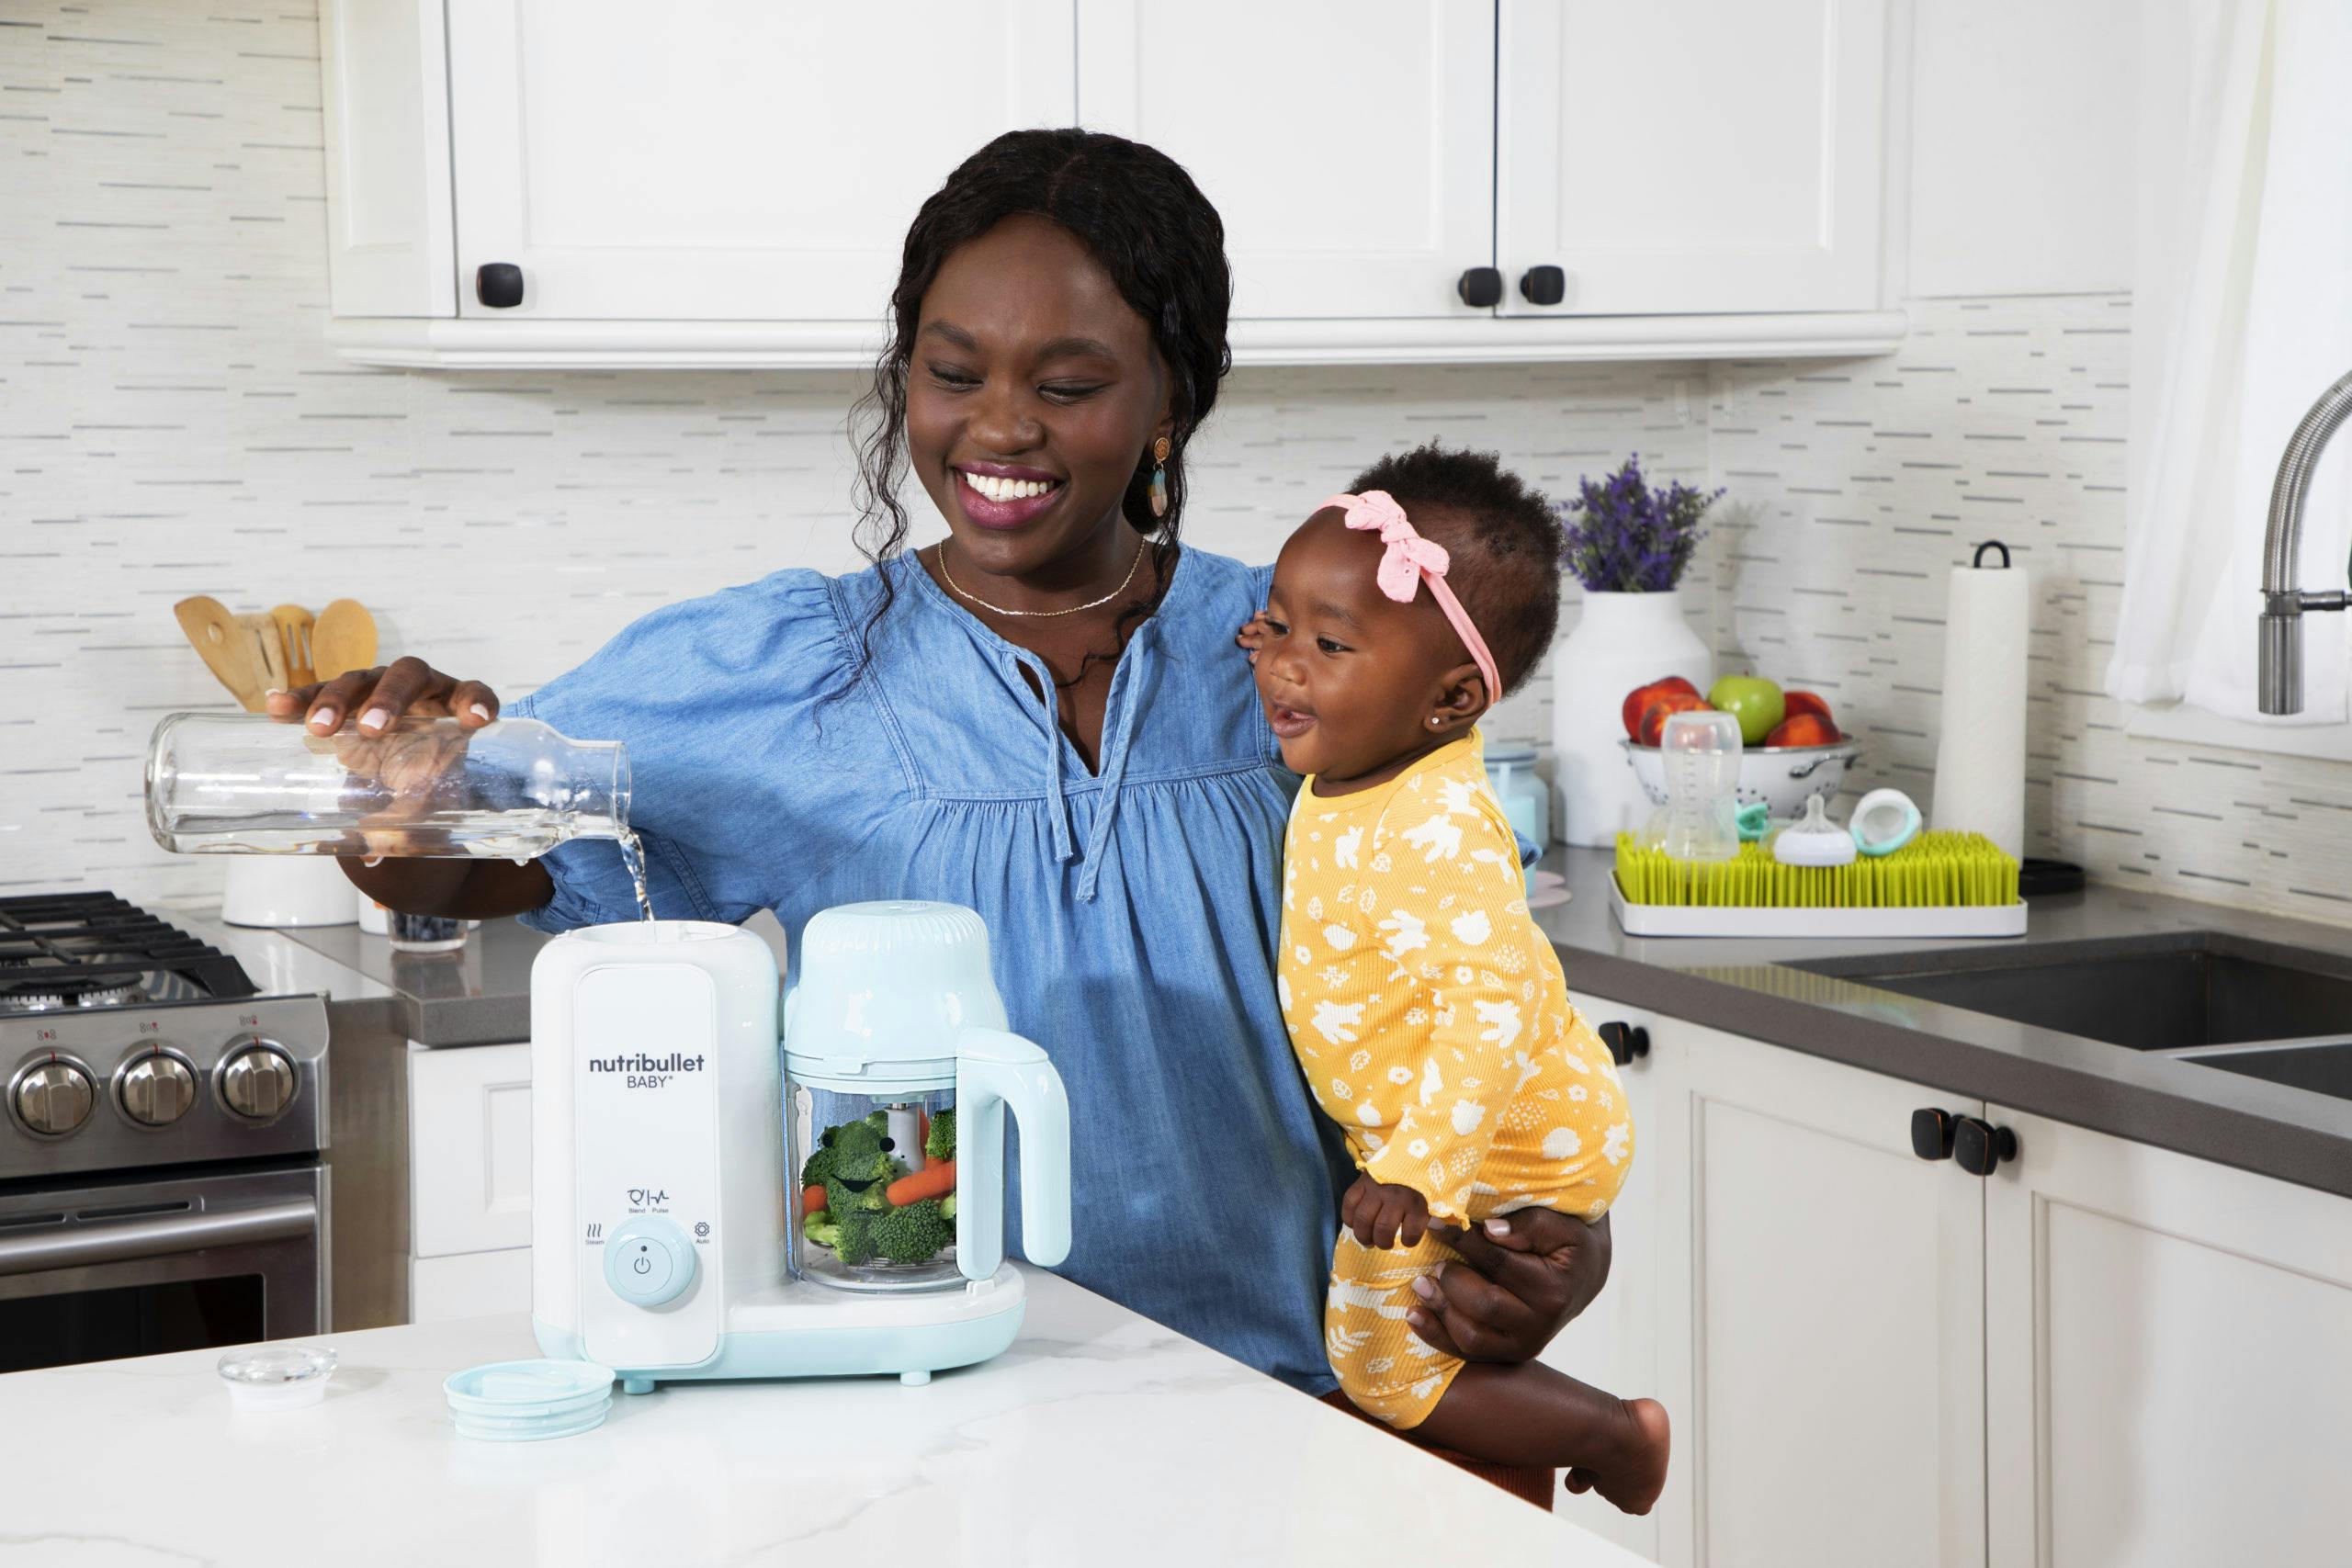 https://nbmedia.imgix.net/NB_Baby_Steam-Blend_Lifestyle_Mom-Pouring-Water_HiRes-scaled.jpg?auto=compress%2Cformat&ixlib=php-3.3.0